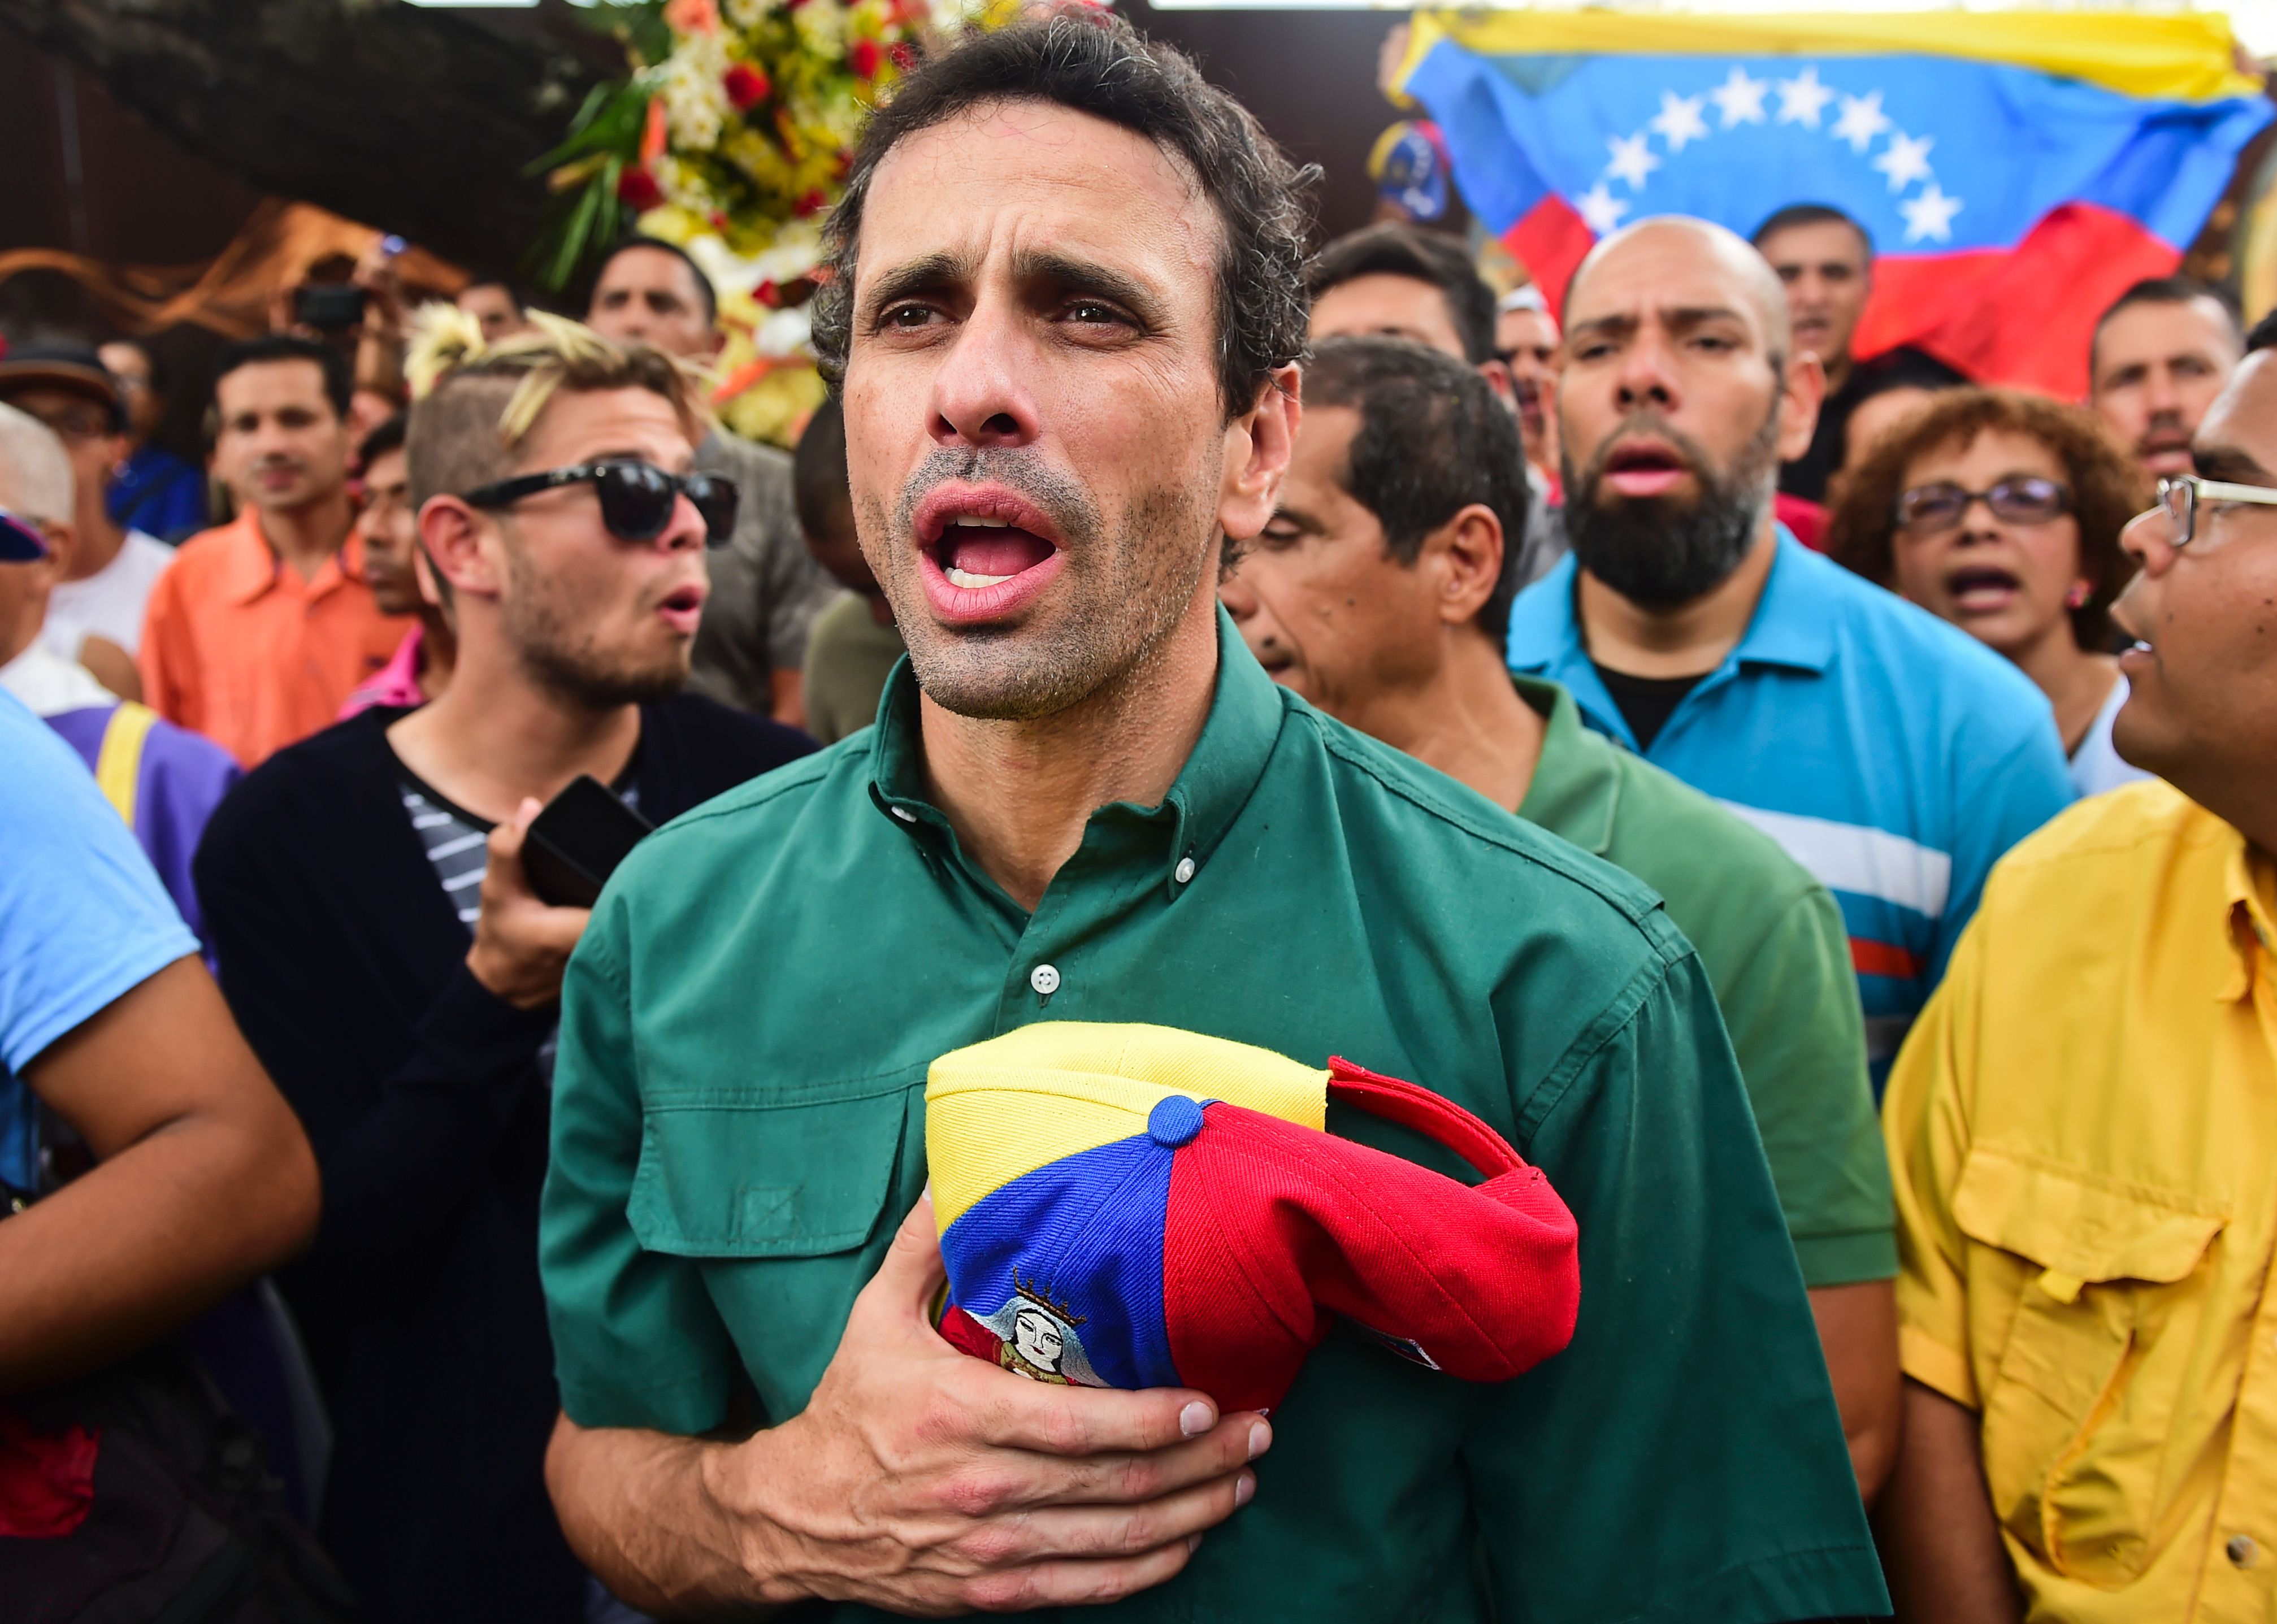 Venezuelan opposition leader Henry Capriles takes part in a march paying tribute to student Juan Pablo Pernalete -killed on the eve by impact of a gas grenade during a protest against President Nicolas Maduro- in Caracas, on April 27, 2017. Venezuela defied international pressure over its deadly political crisis as European lawmakers accused its government of "brutal repression" and US President Donald Trump called the country "a mess". Nearly a month of clashes at anti-government protests have left 28 people dead, according to prosecutors. / AFP / RONALDO SCHEMIDT